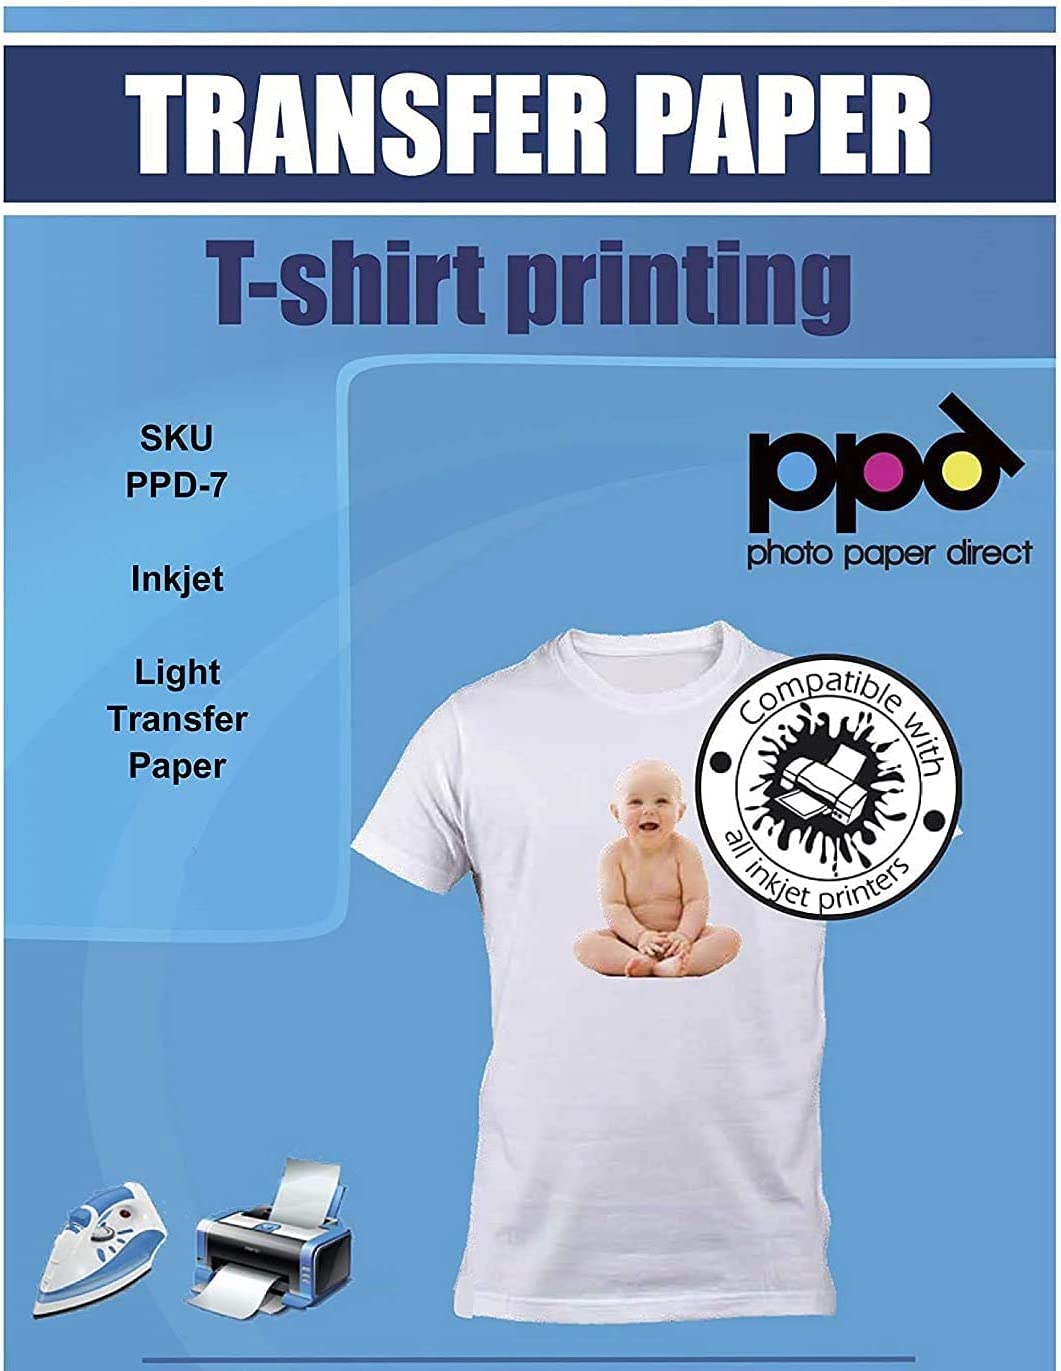 Heat Transfer Paper for Light Fabric Iron-On White and Light Colored T  Shirt Pack of 10 Sheets 8.5 x 11 RED GRID